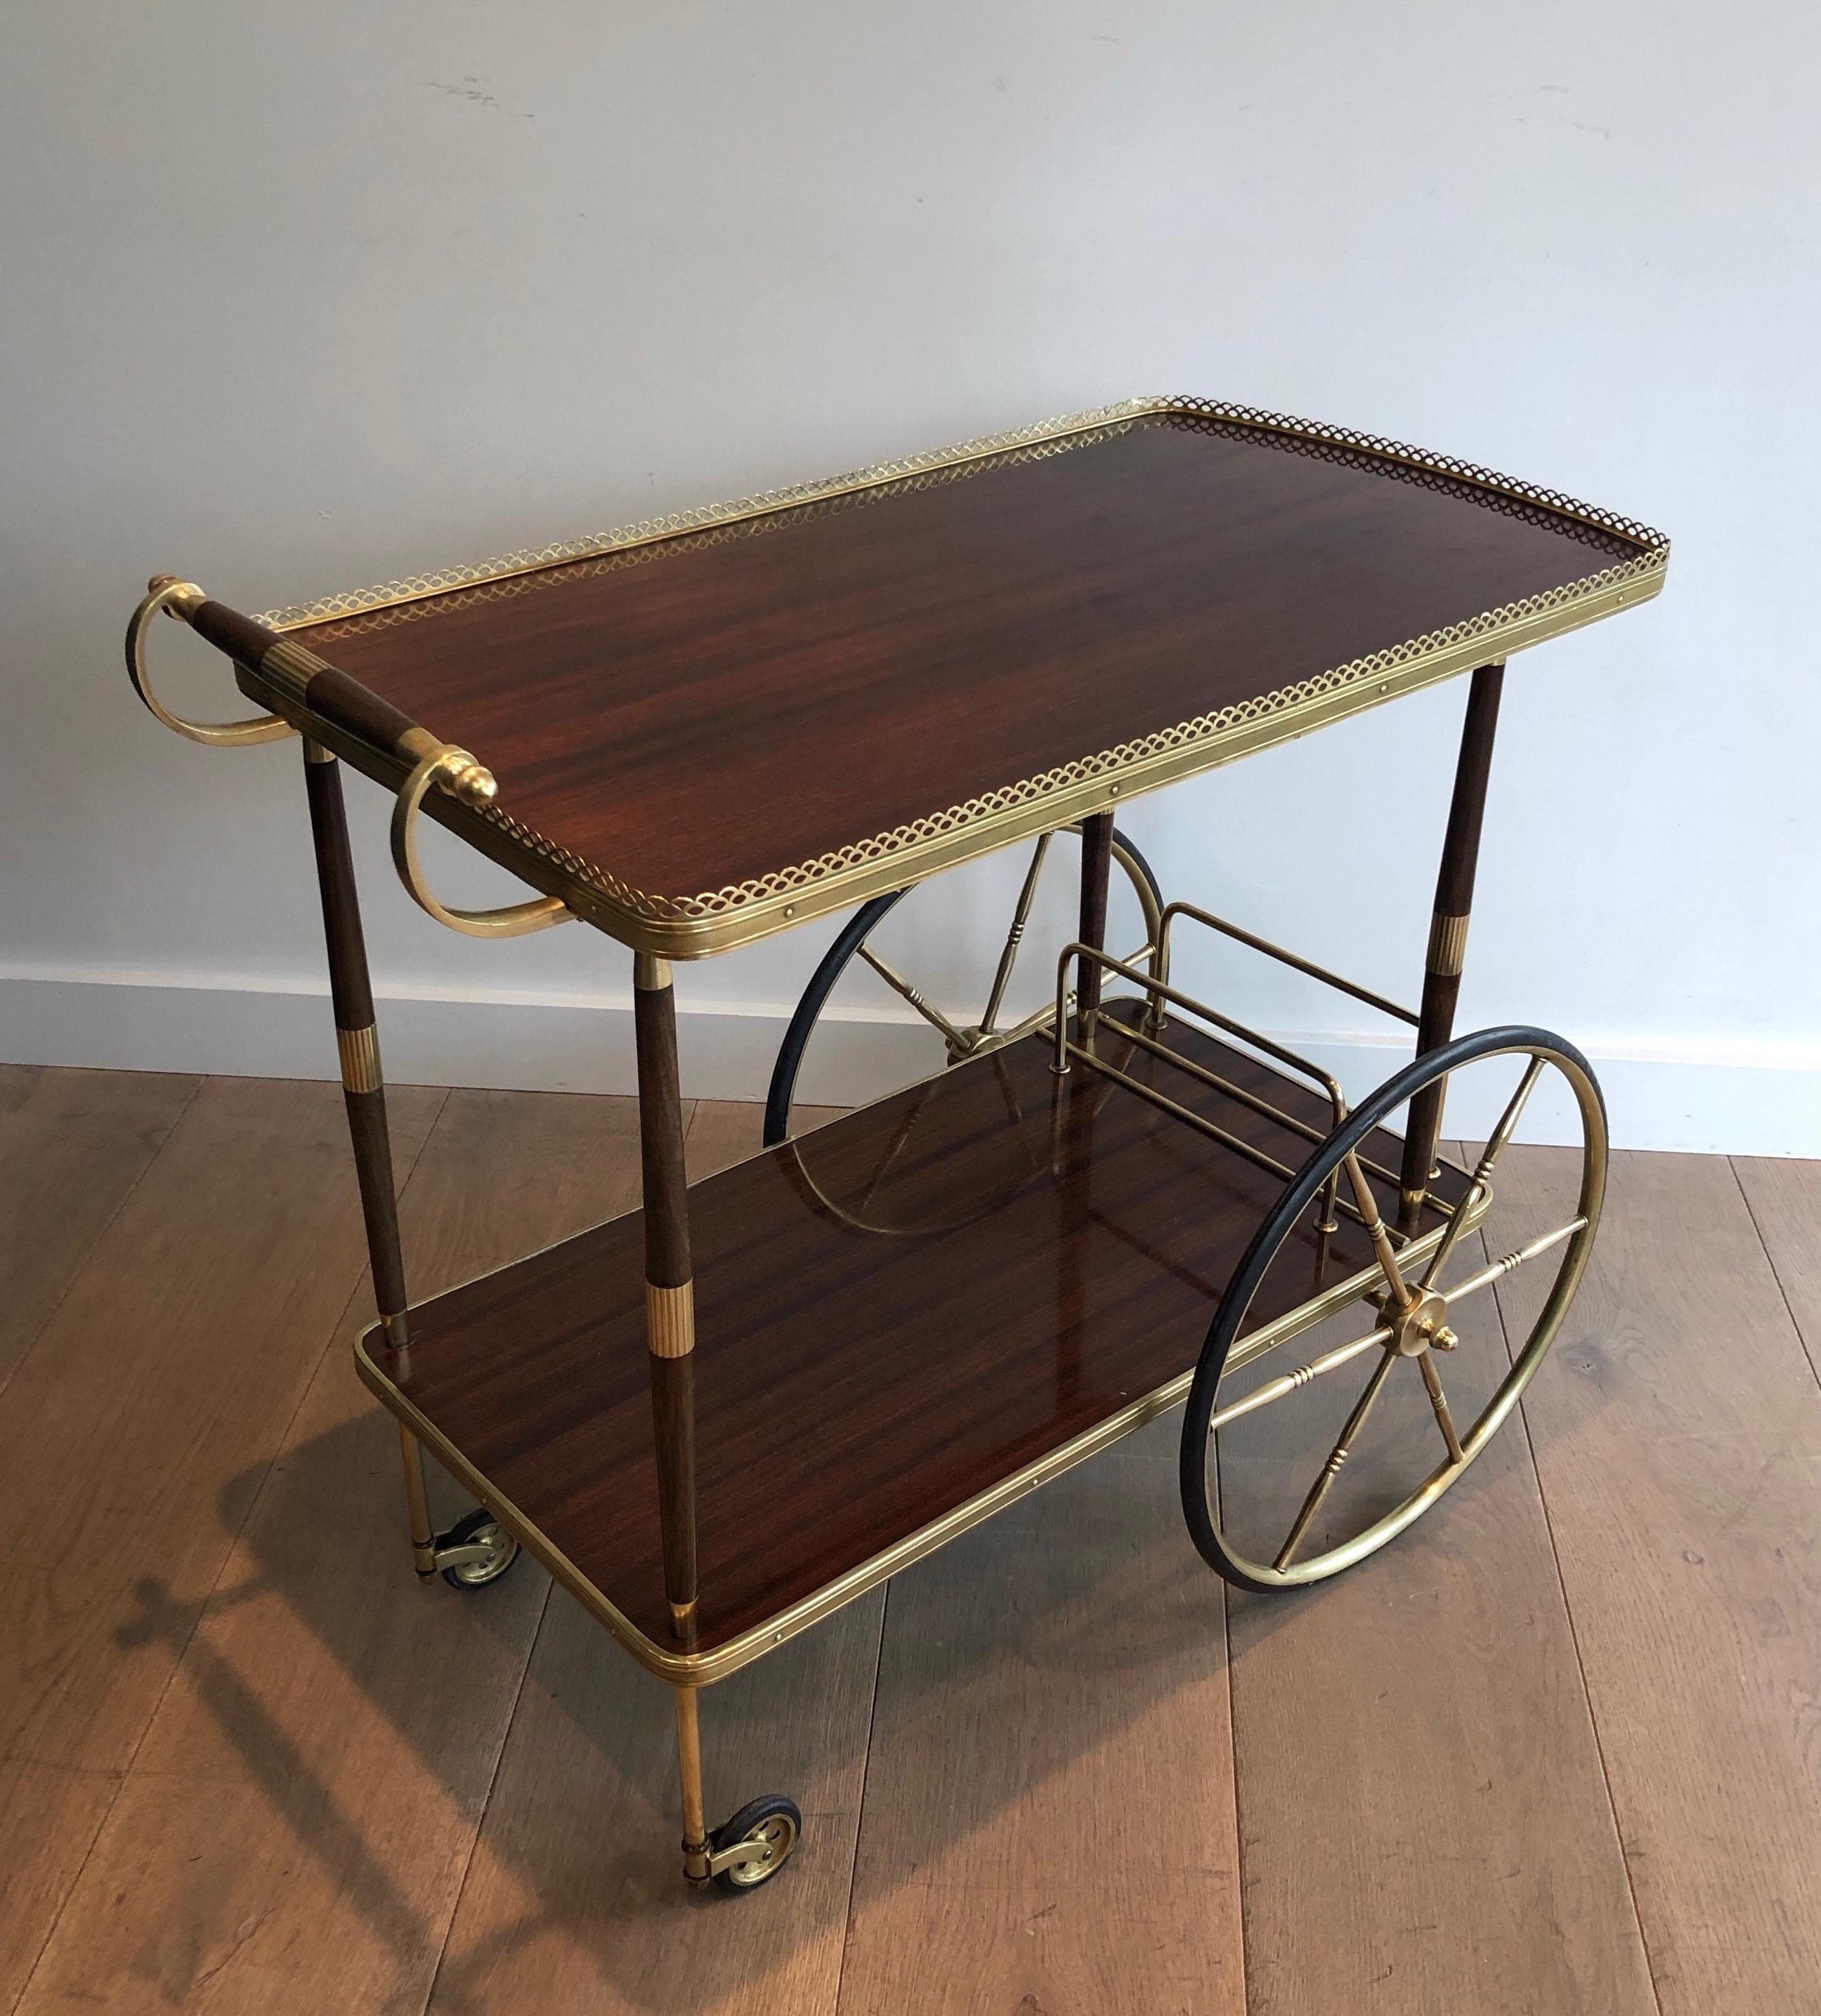 This neoclassical style bar cart is made of mahogany and brass. This is a French work in the style of famous designer Maison Jansen. Circa 1940.